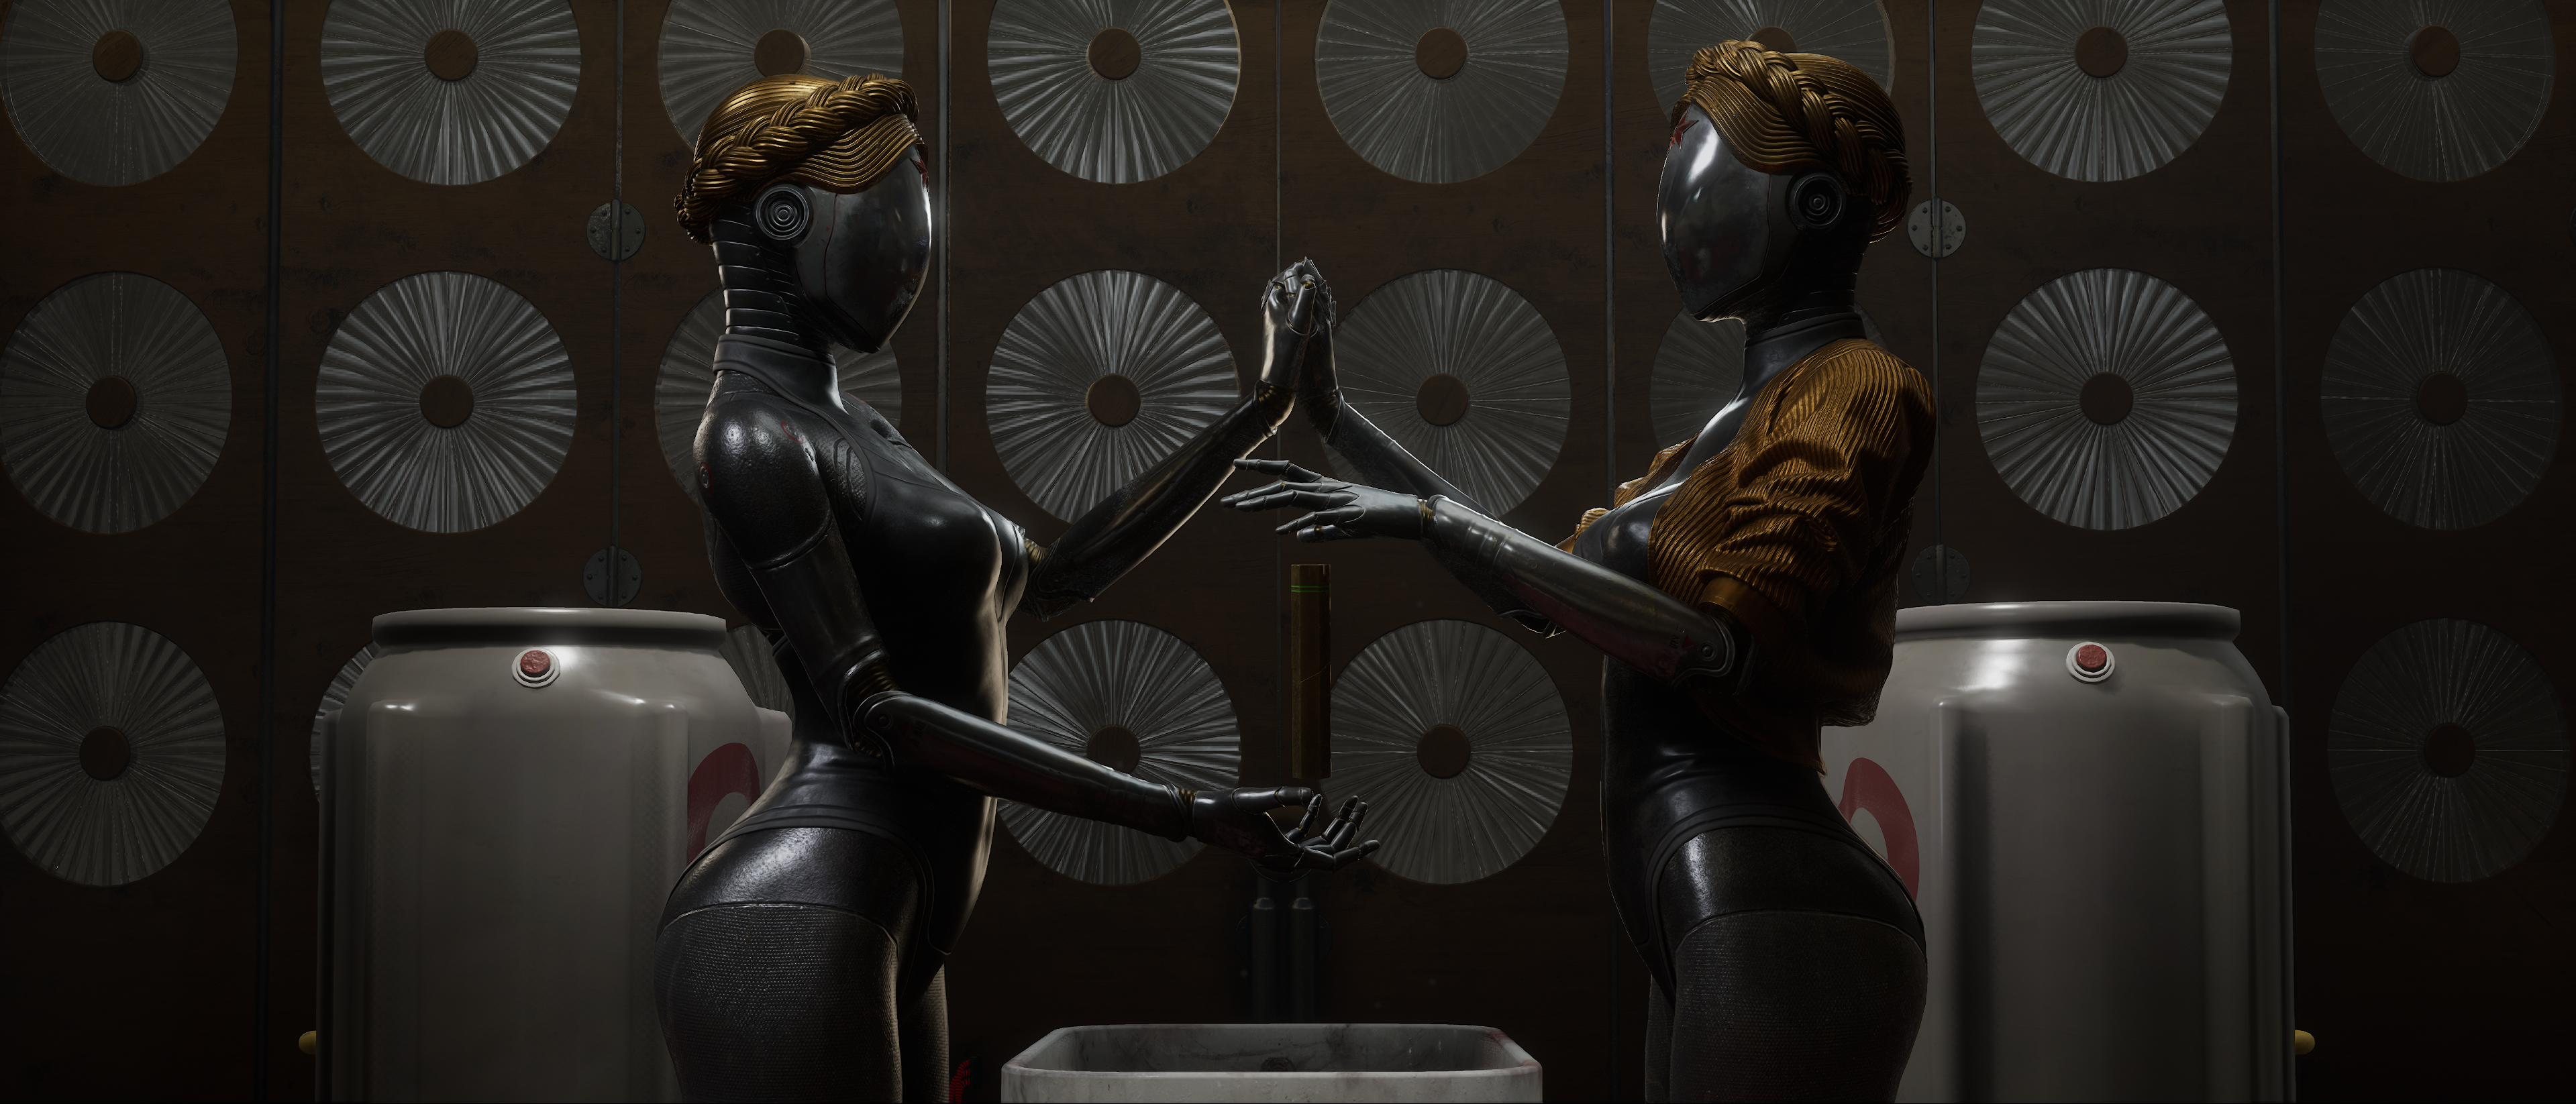 People 3839x1646 The Twins (Atomic Heart) Atomic Heart androids